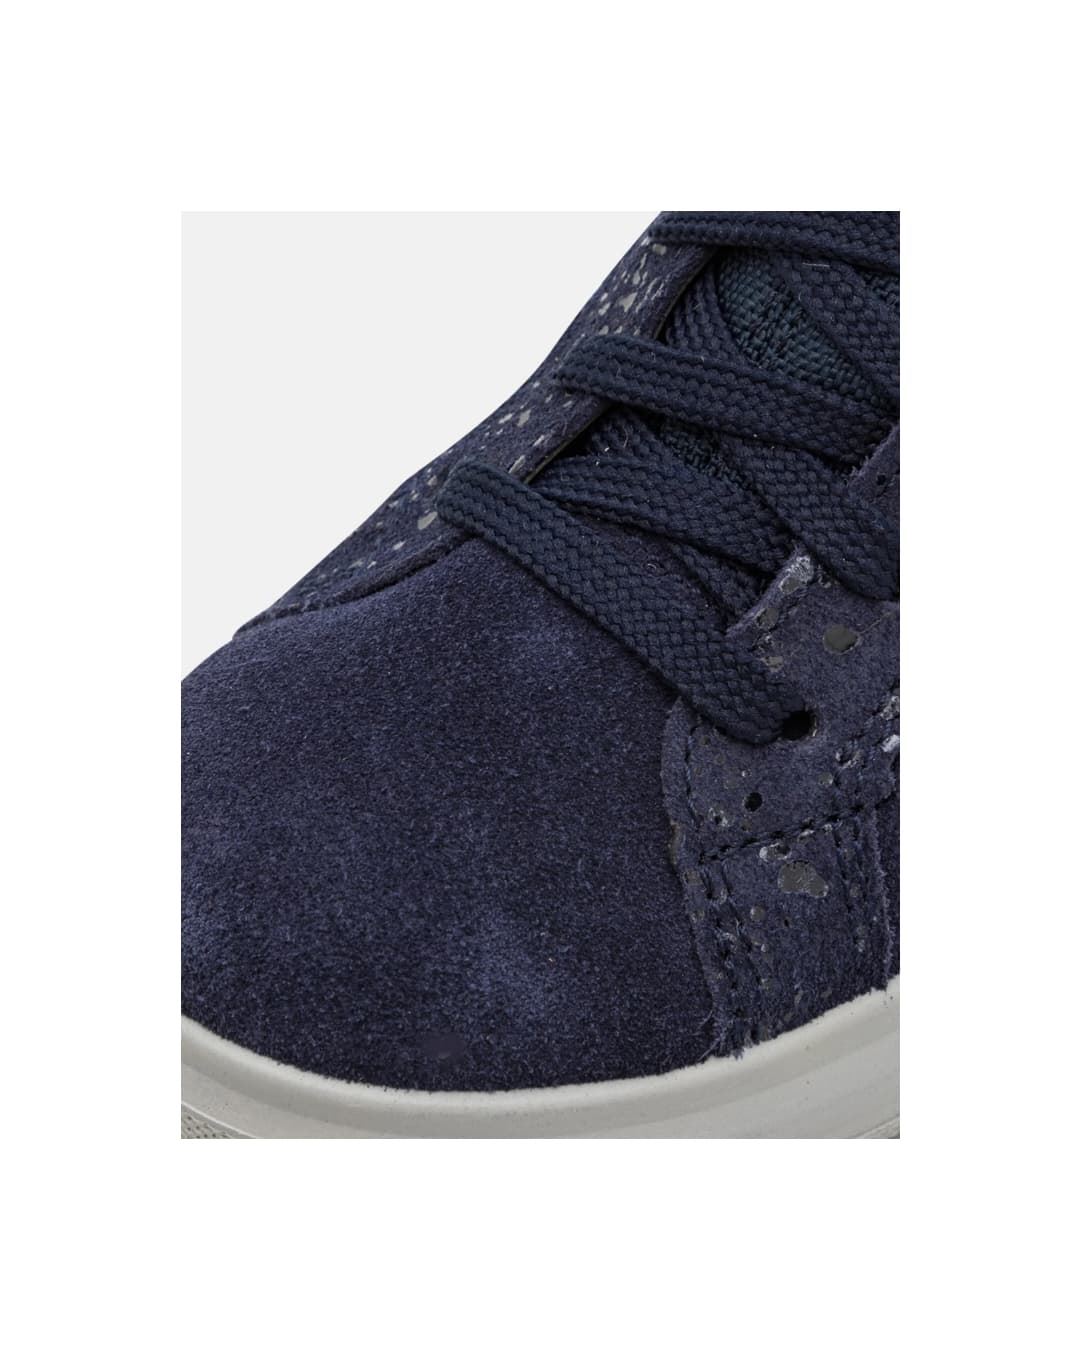 Superfit Girls Gore-tex Ankle Boot Navy Blue - Image 4